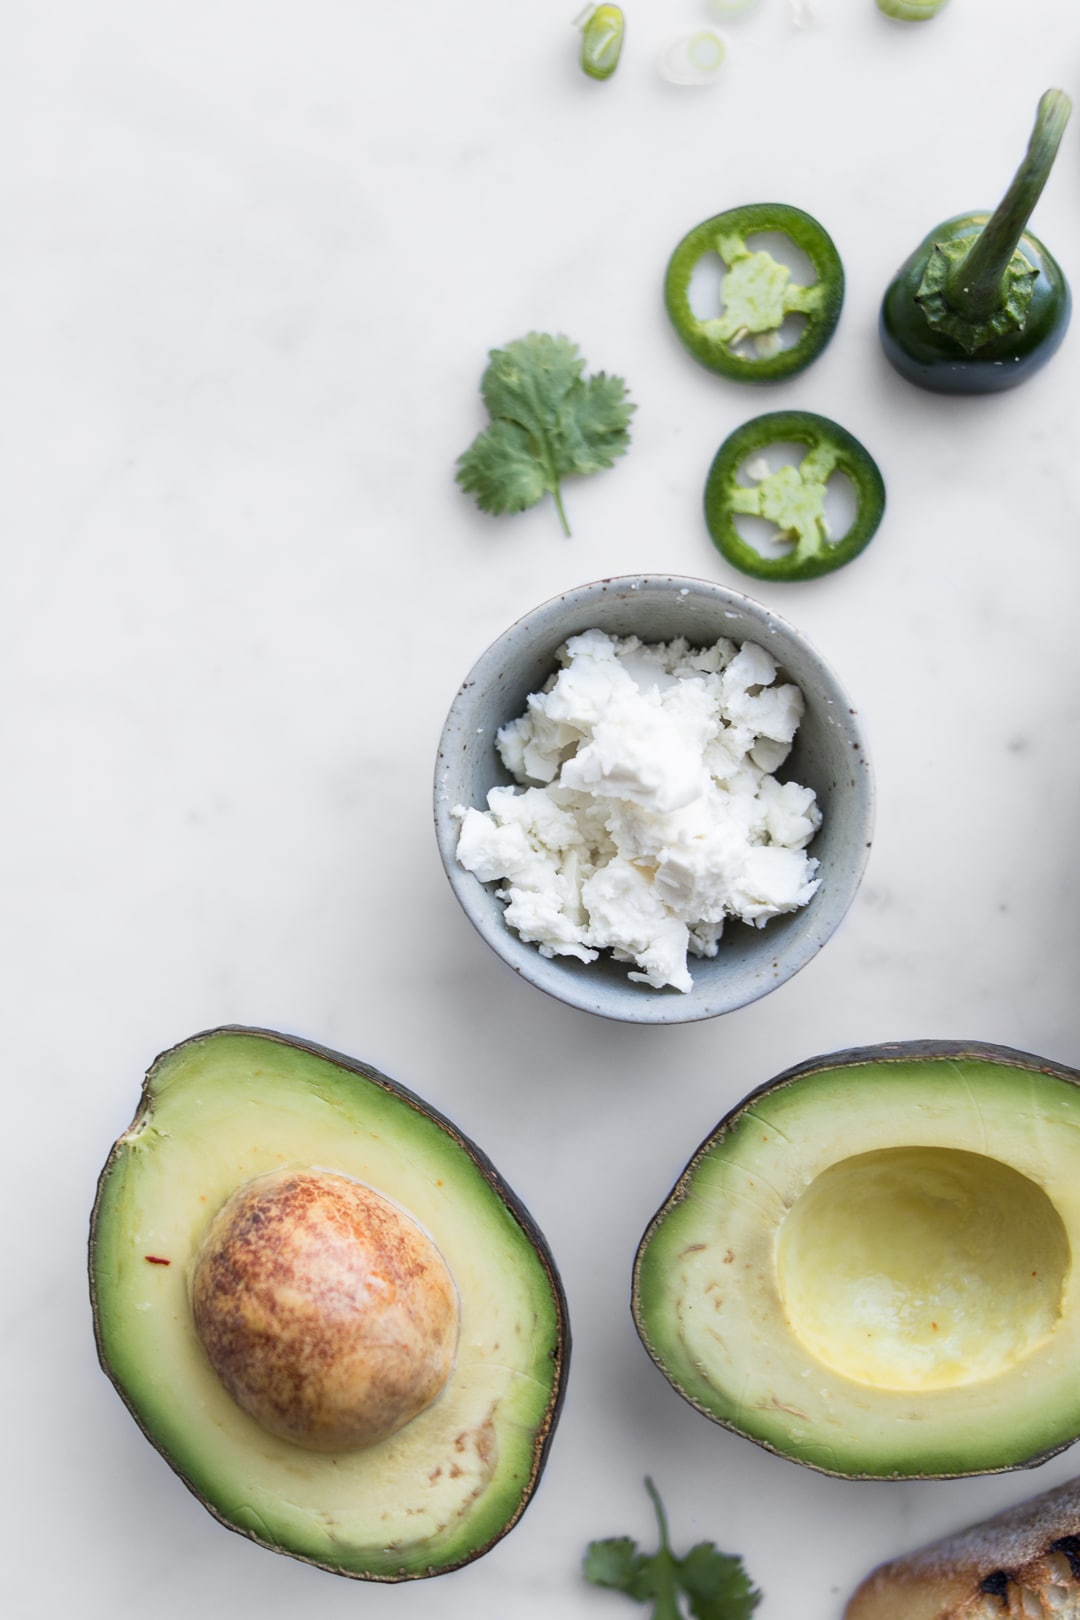 Halved avocado, bowl of crumbled cheese, cilantro leaf, and jalapeno slices on a table